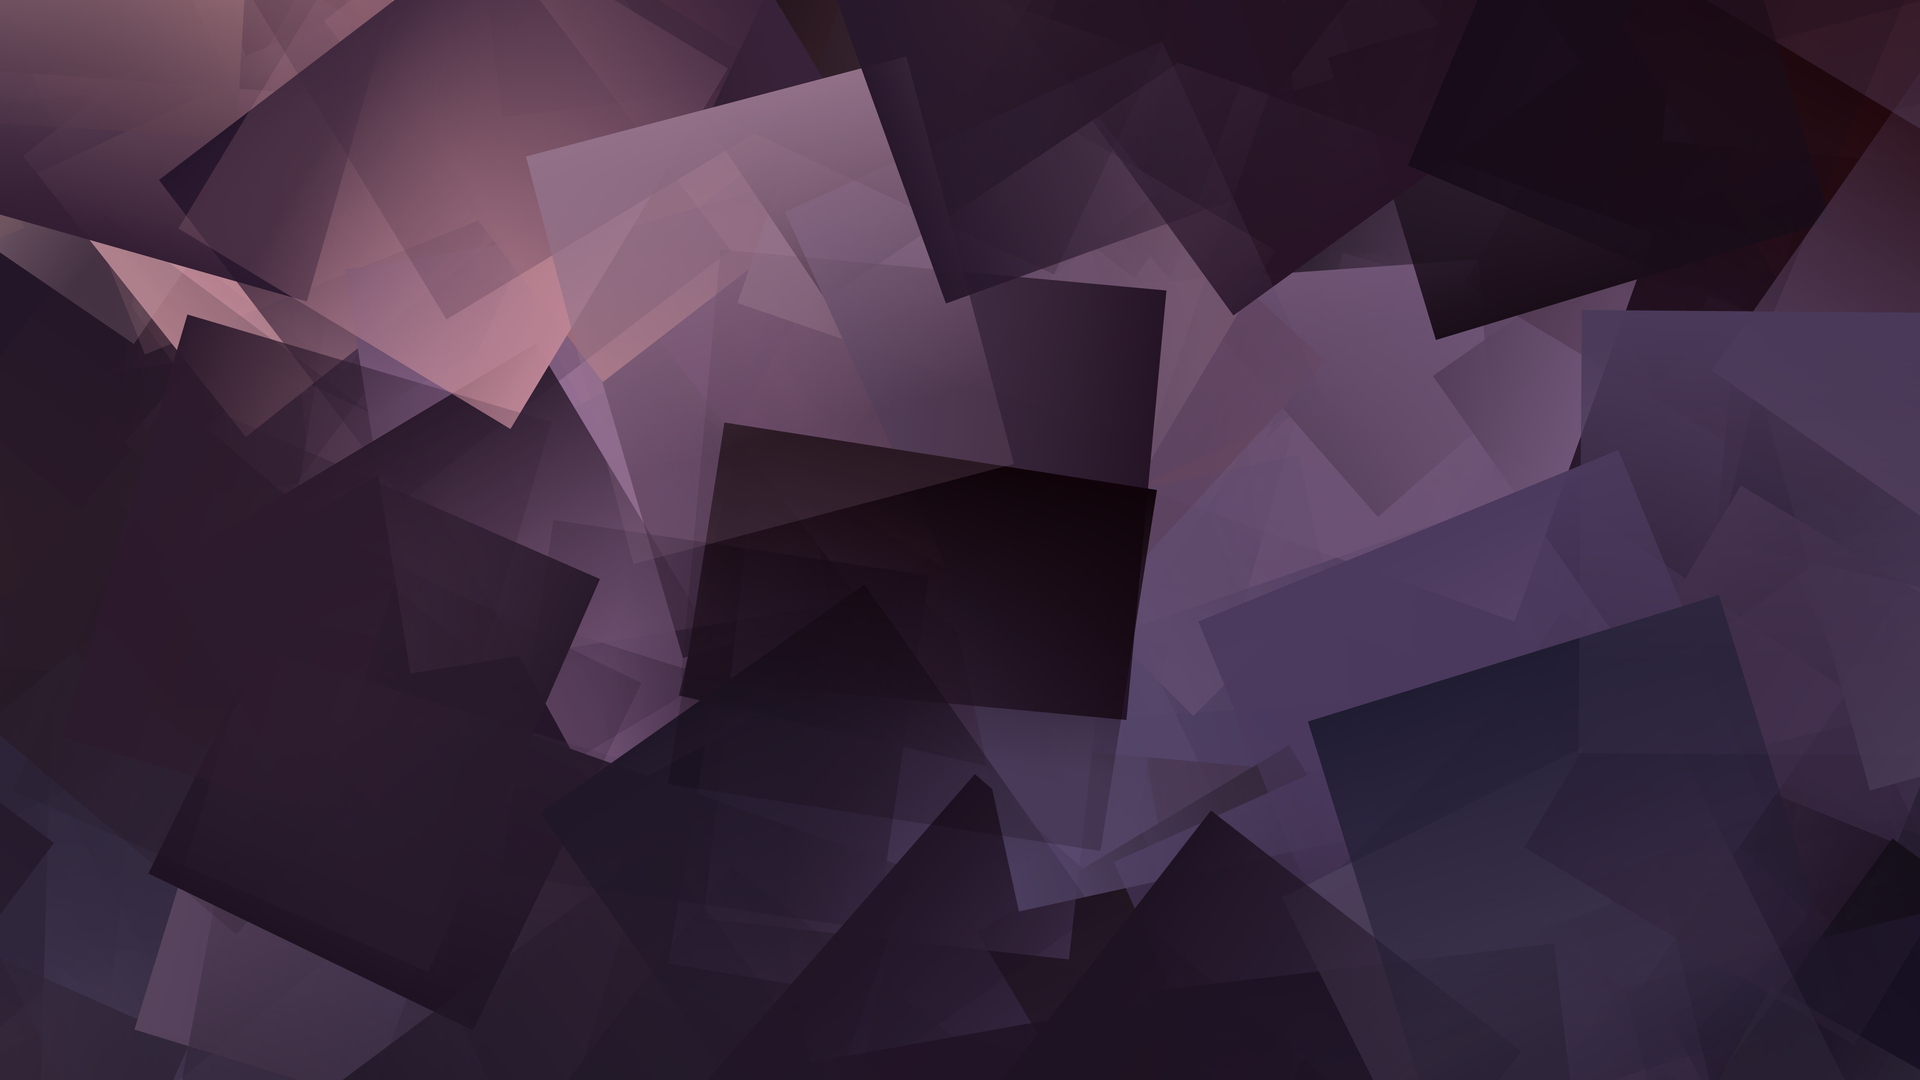 Abstract Shapes 4K 2021 Hd Wallpapers